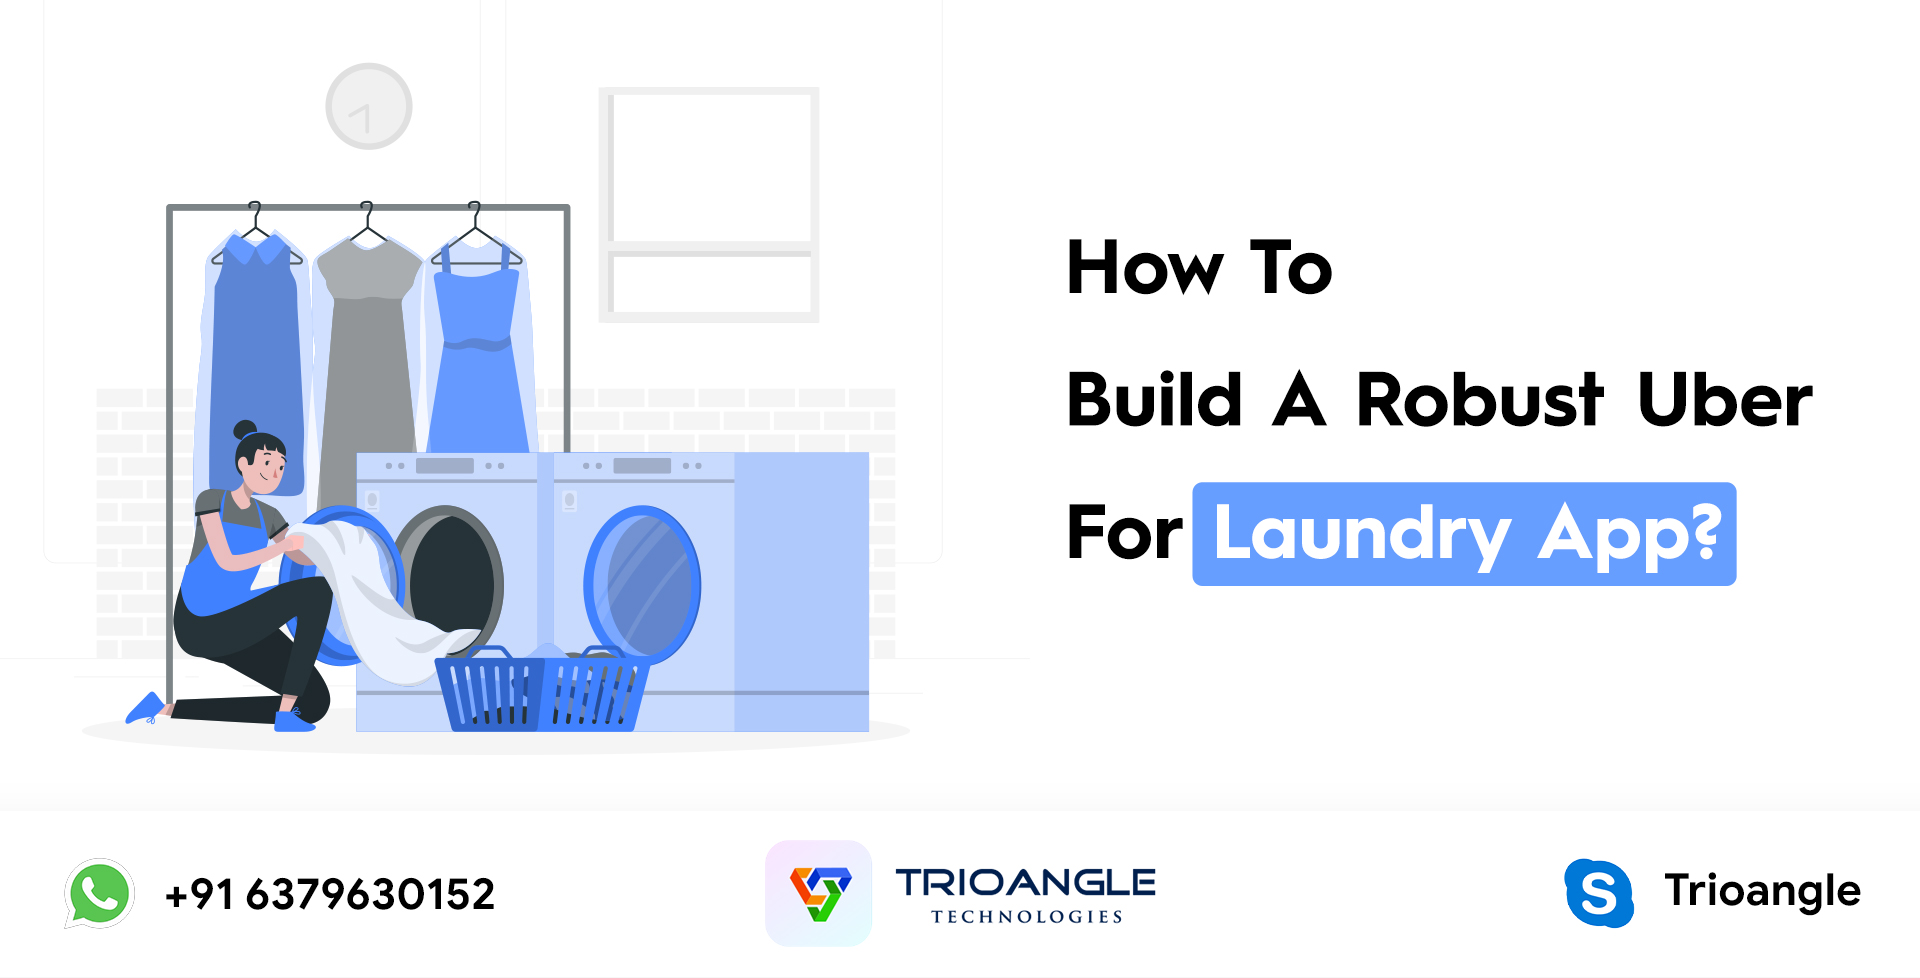 Article about How To Build A Robust Uber For Laundry App